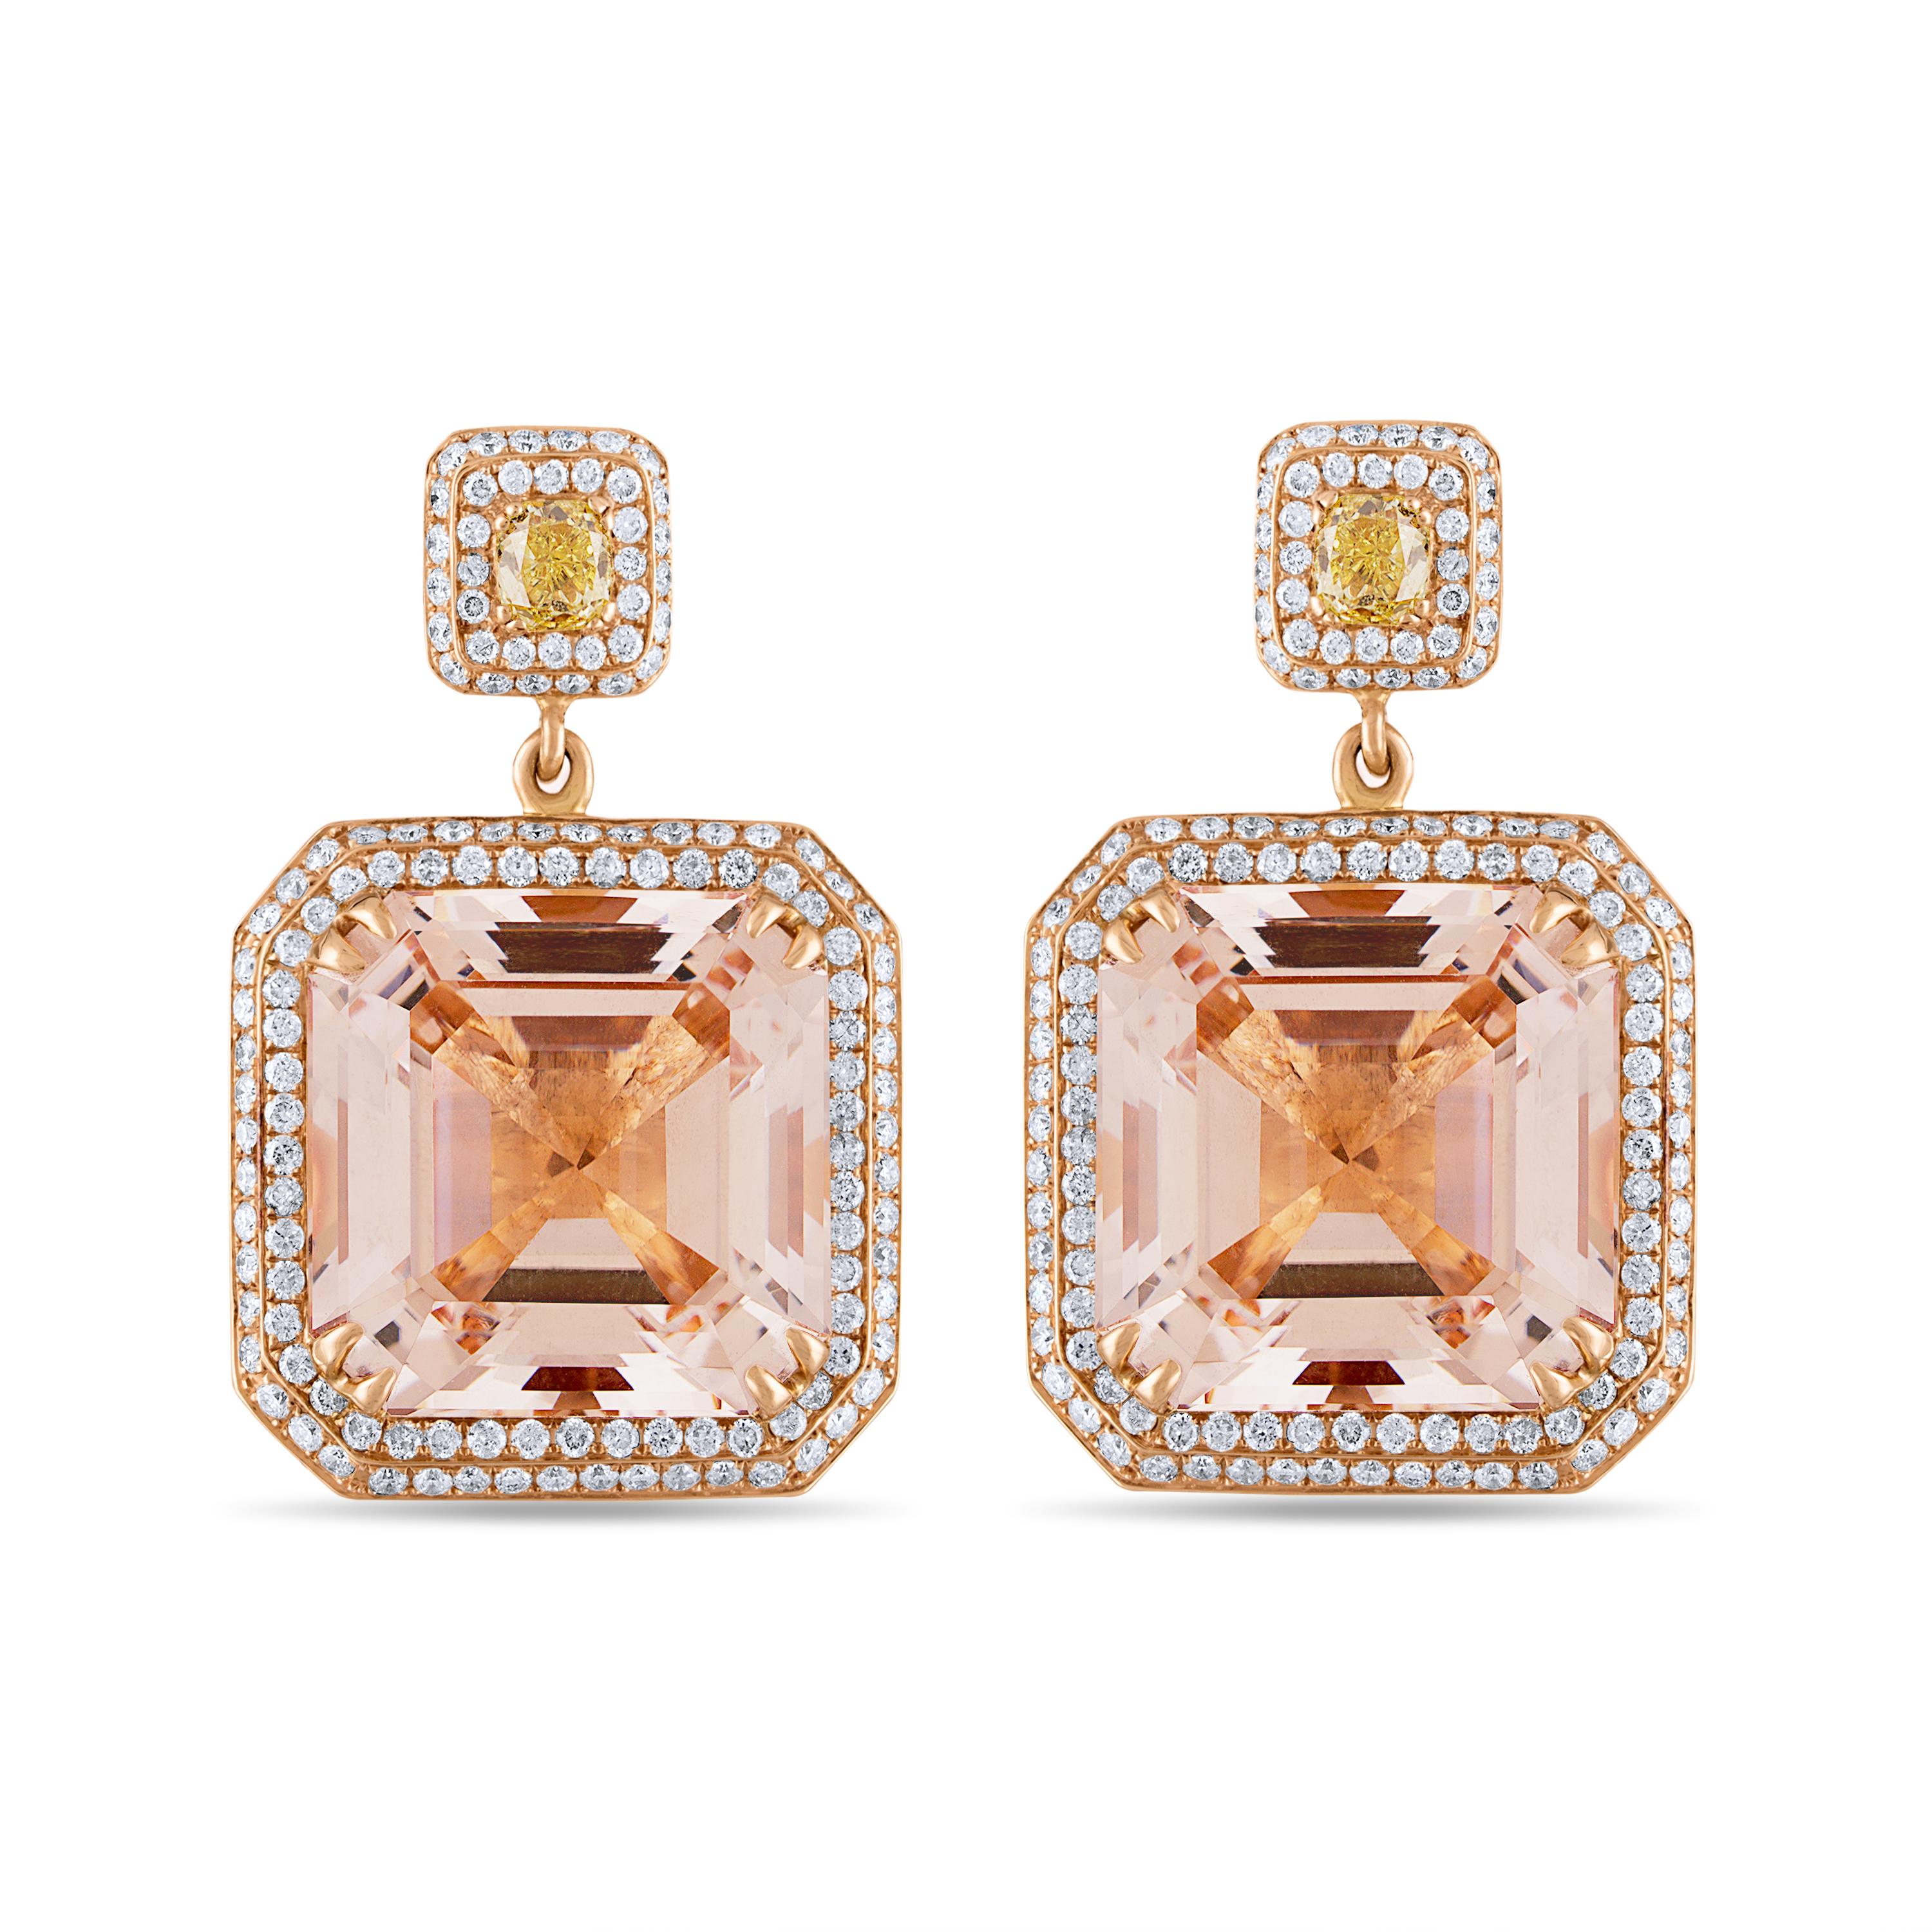 33.77 Carat Natural Asscher-Cut Morganite and Diamond Gold Earrings:

A stunning pair of earrings, it features 2 asscher-cut natural morganites weighing 33.77 carat surrounded by white round-brilliant cut diamonds and topped by cushion-cut yellow